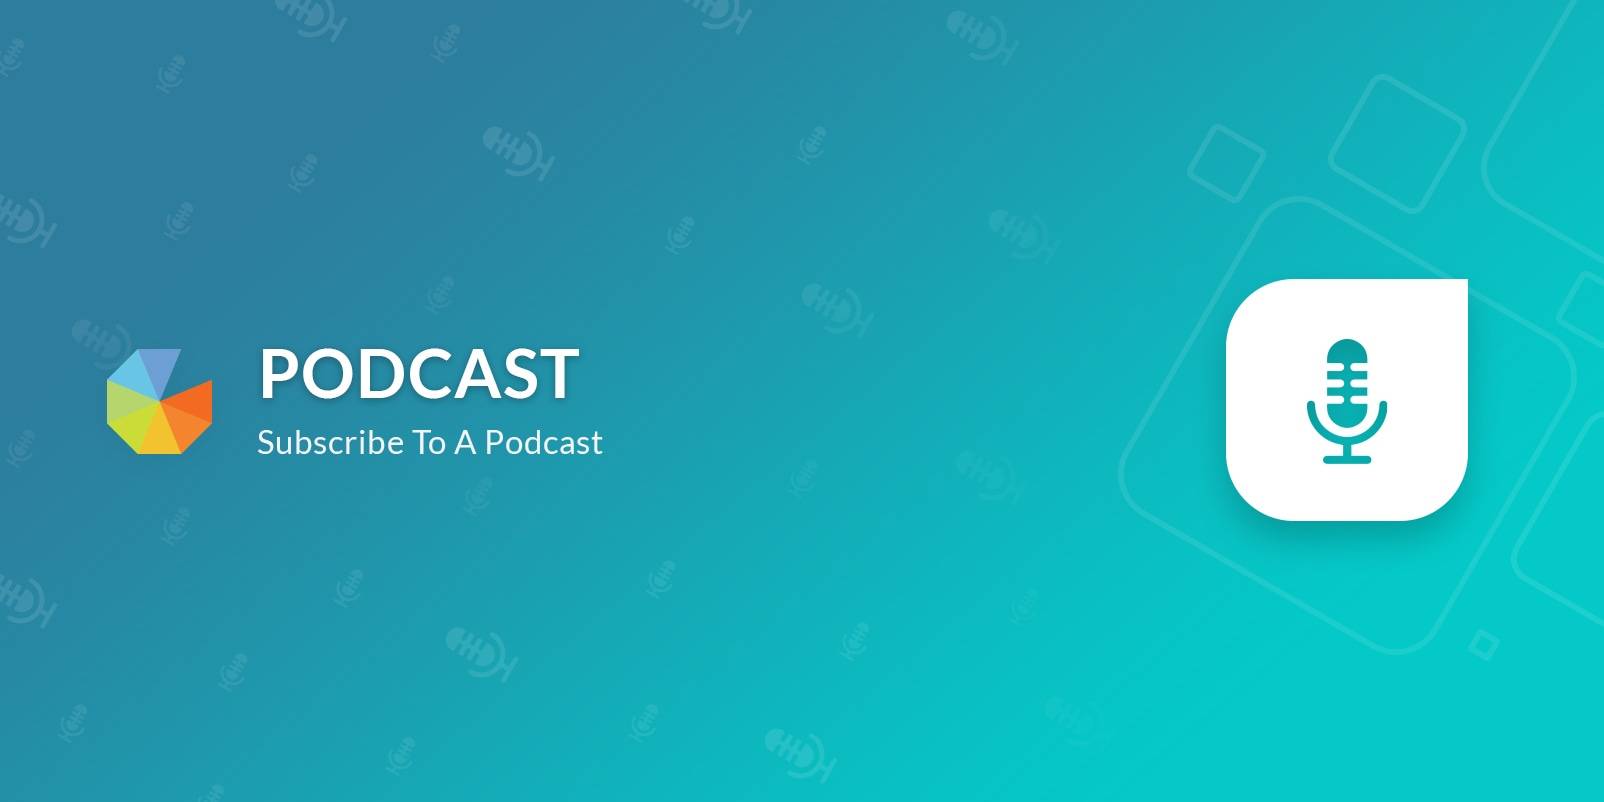 Podcast Actions for Gleam.io